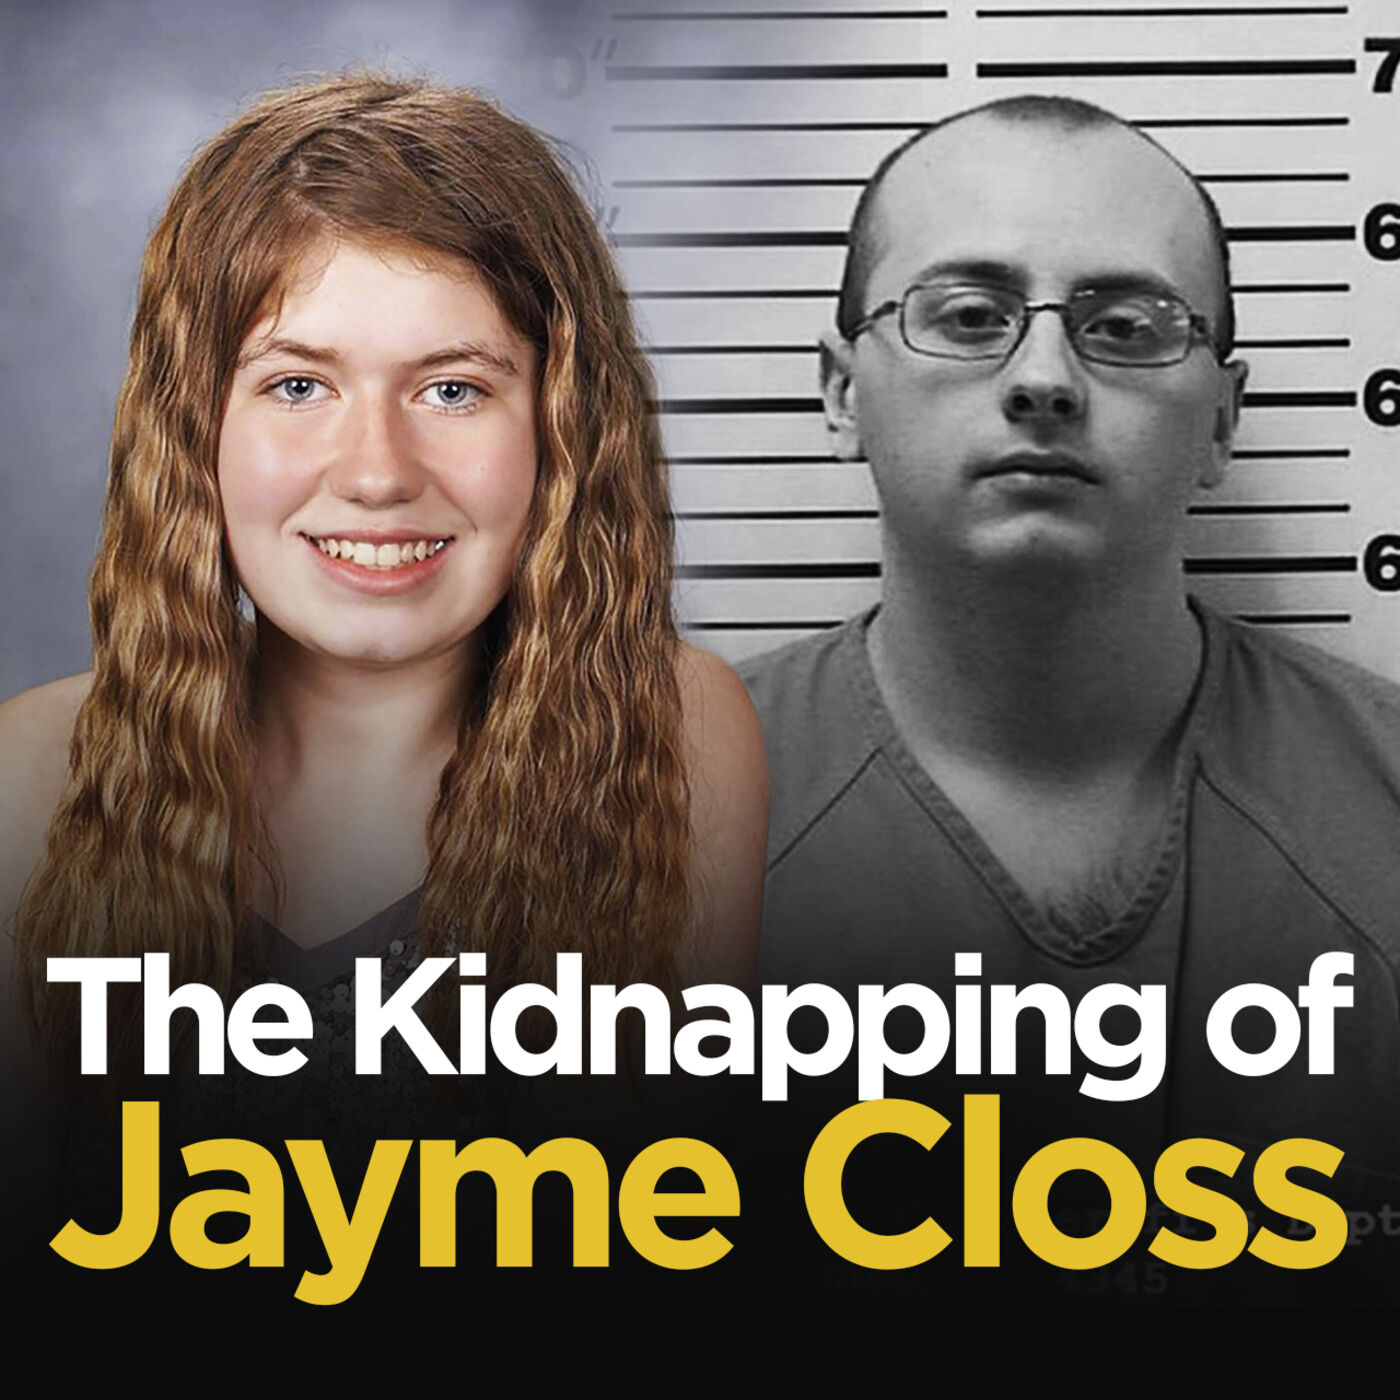 88 Days of Horror: The Kidnapping of Jayme Closs